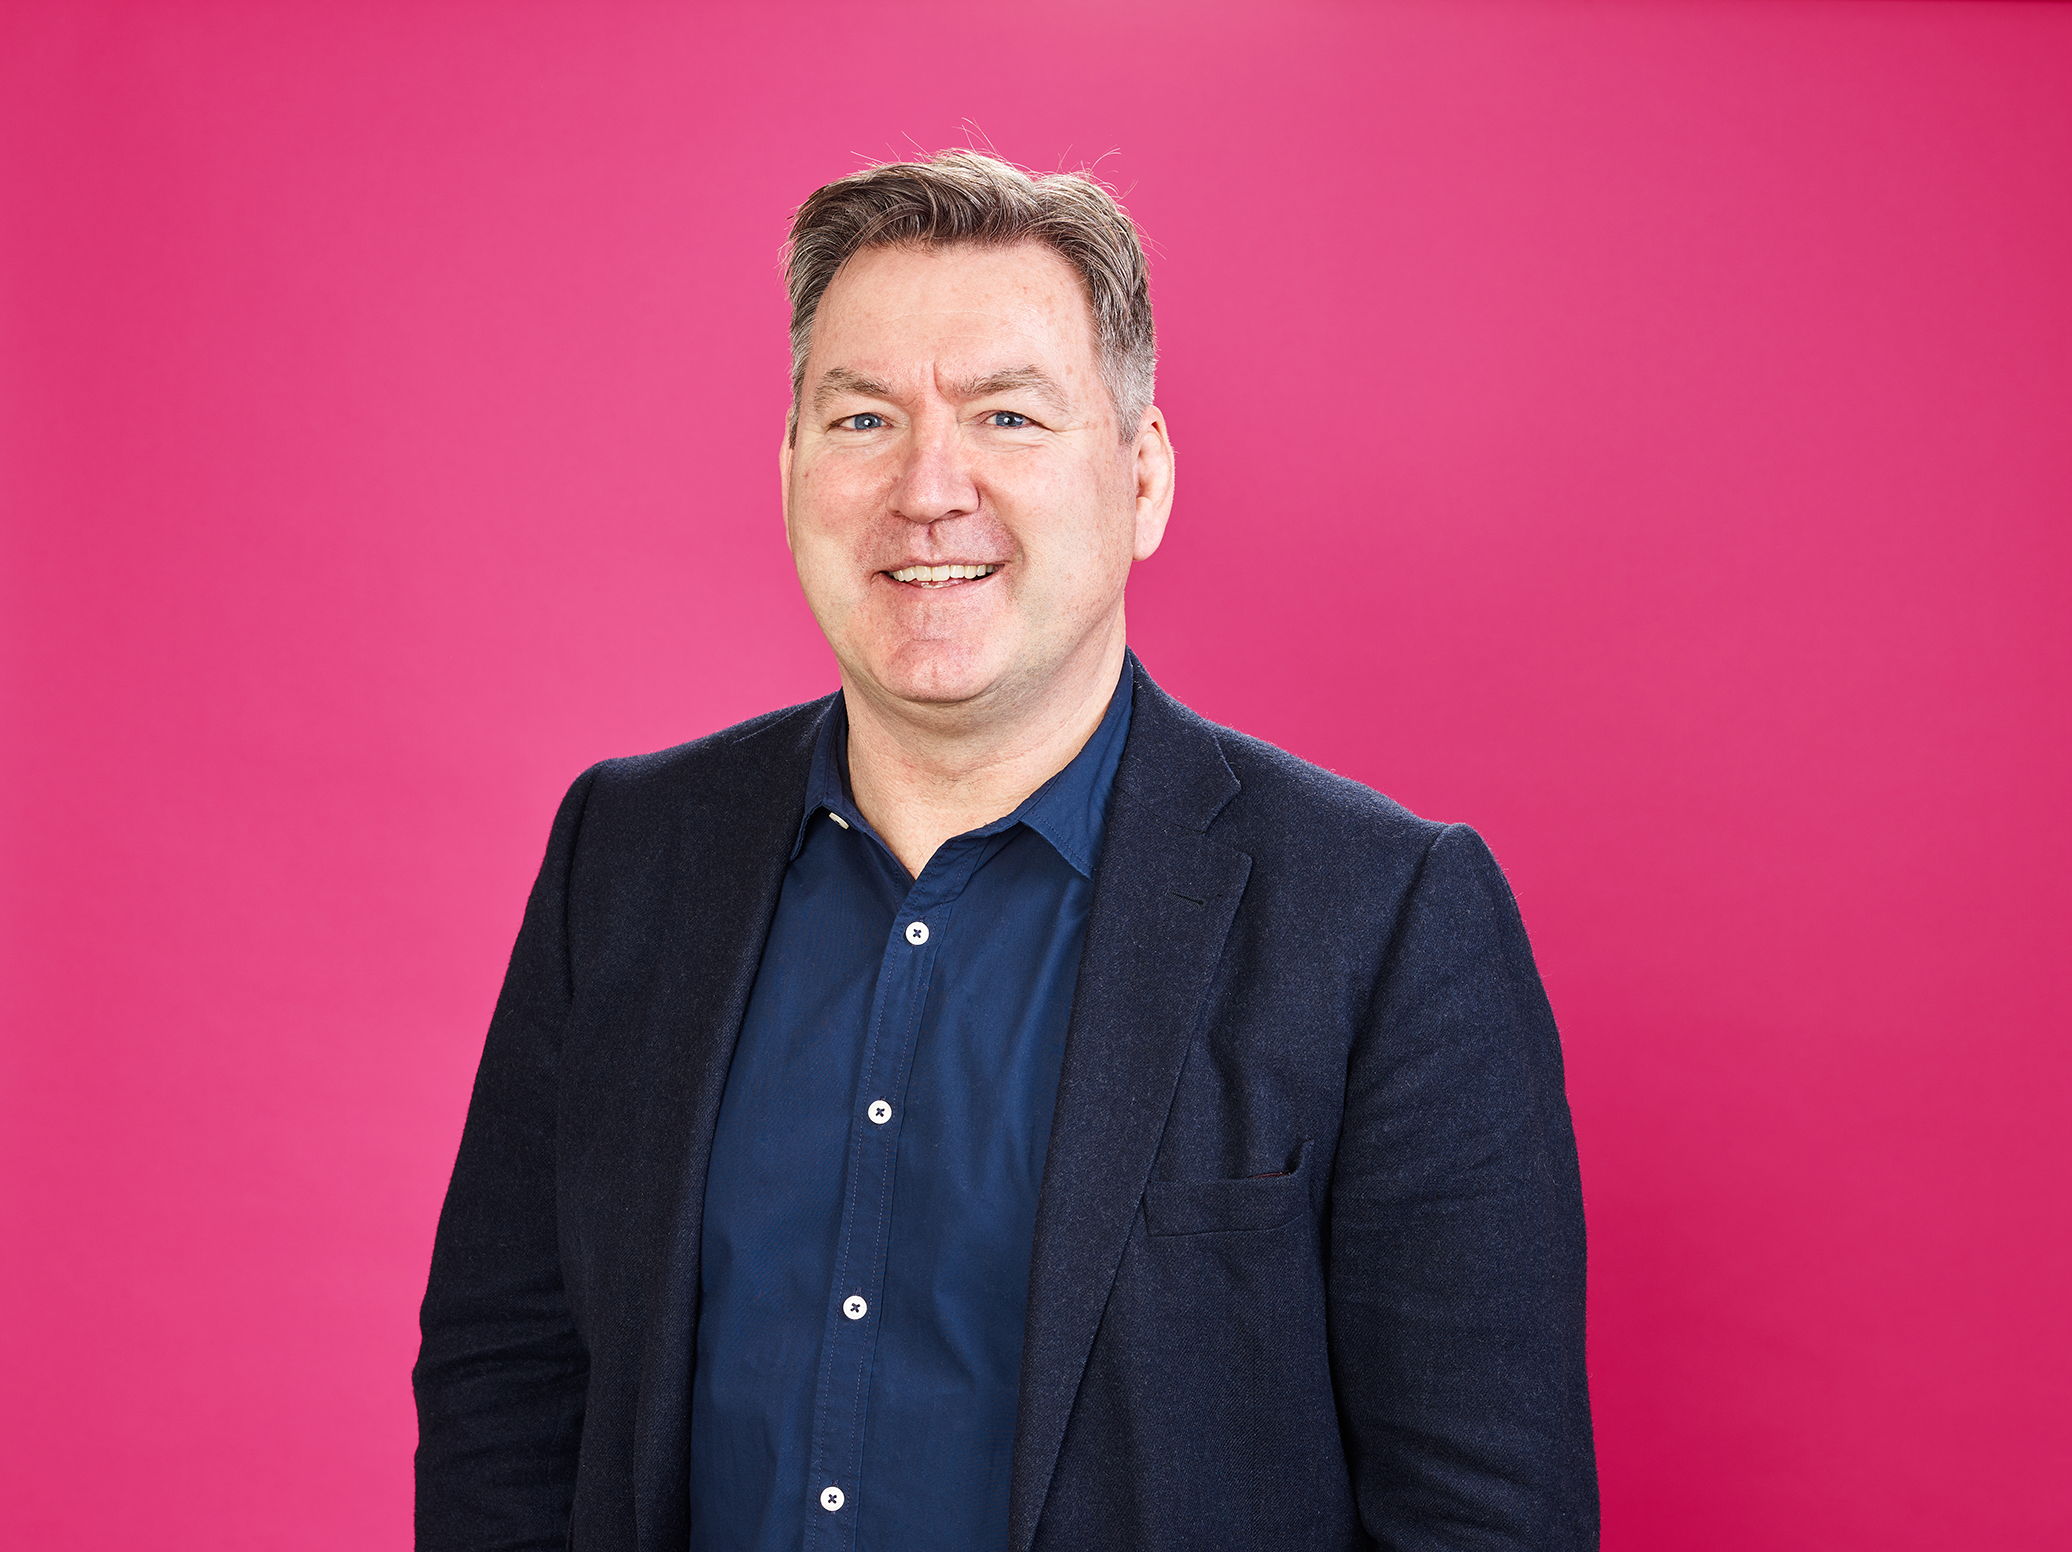 Clevertouch CEO and Co-Founder Adan Sharp